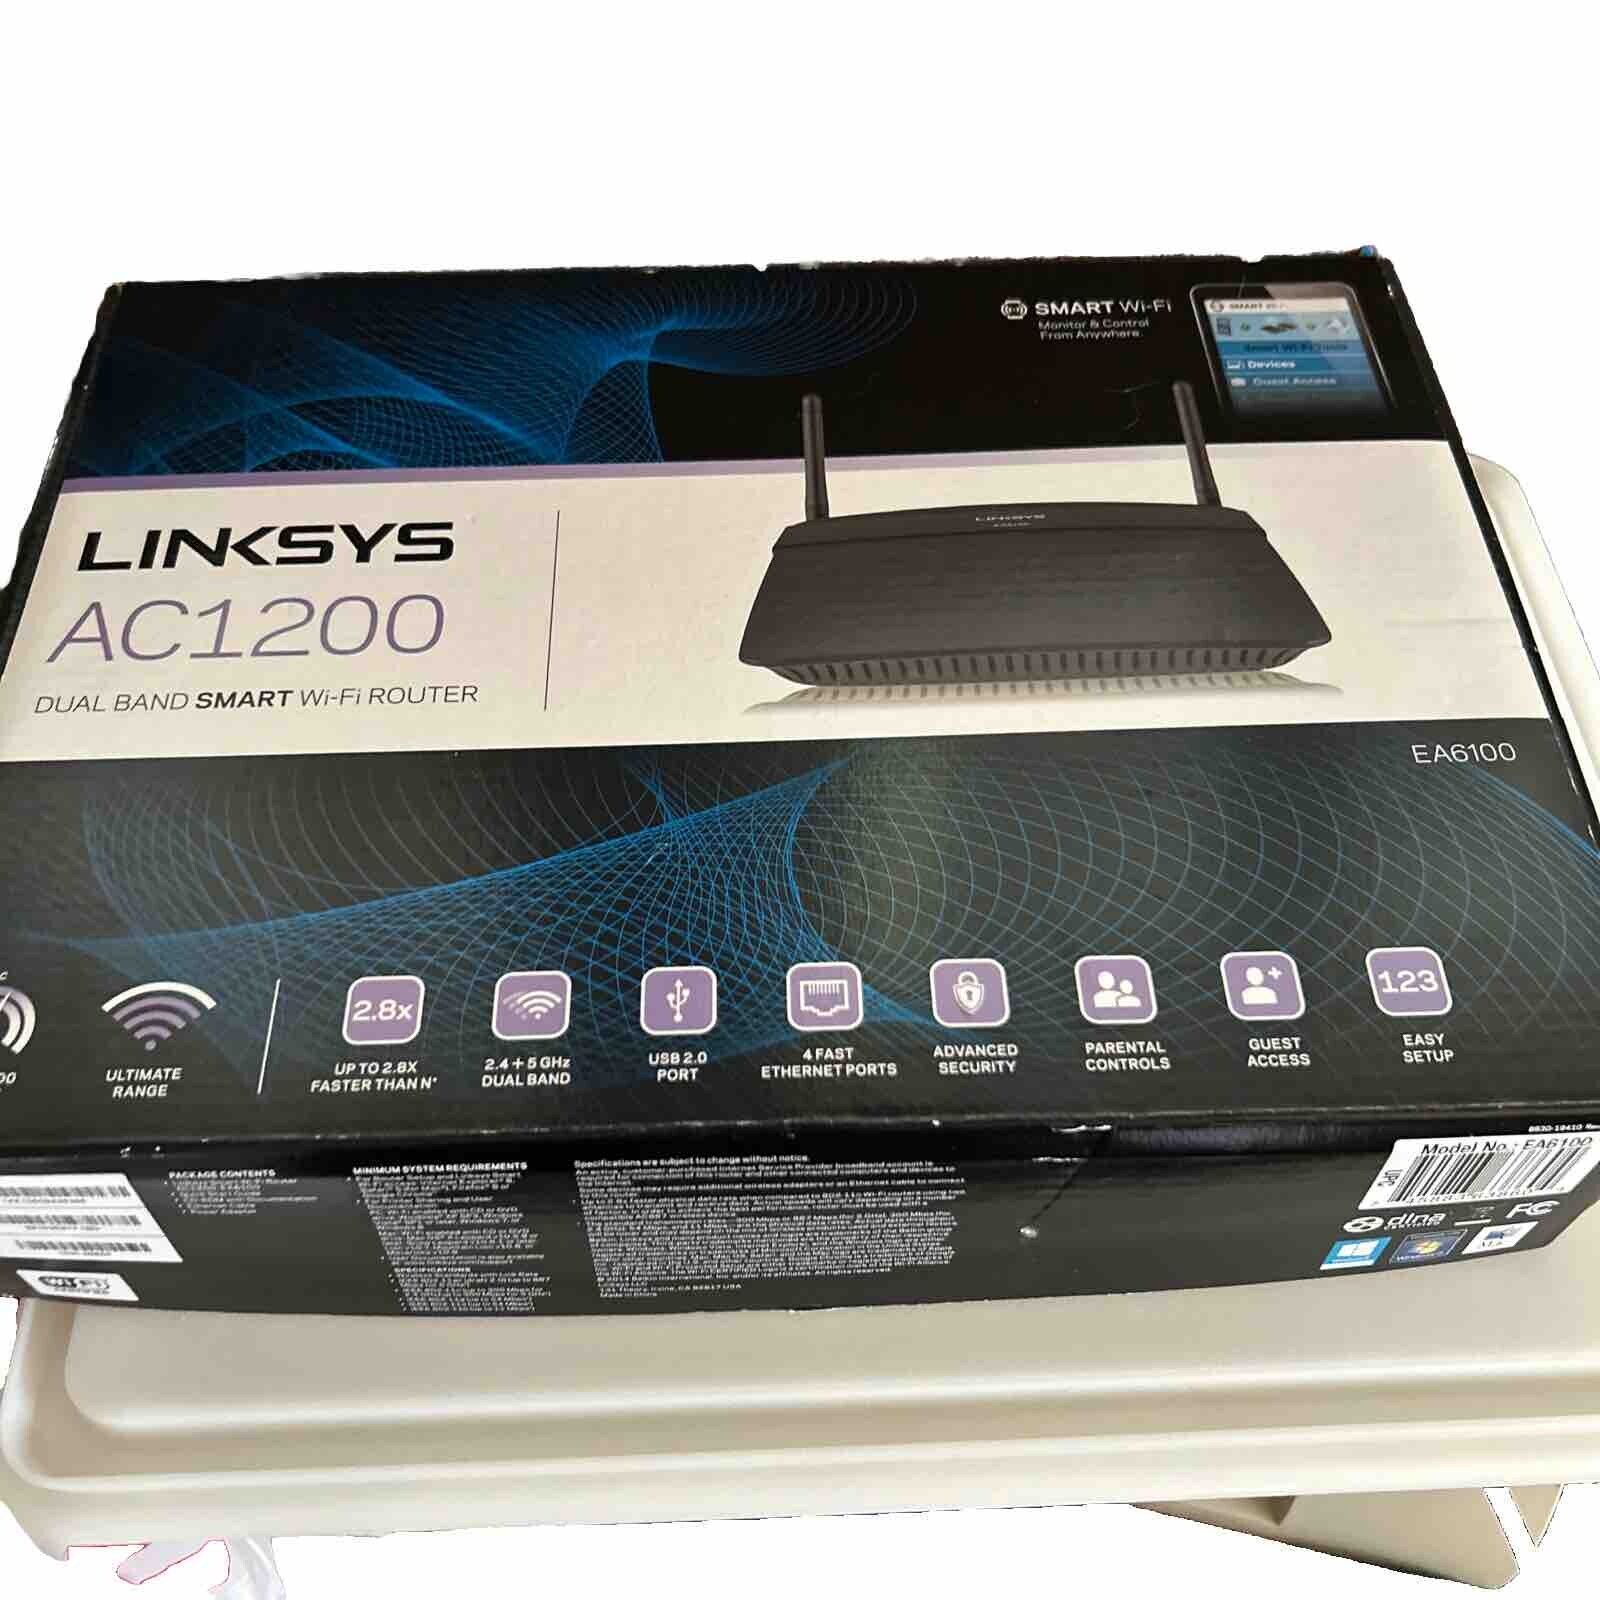 Linksys EA6100 AC1200 Dual-Band smart WiFi Router in Box